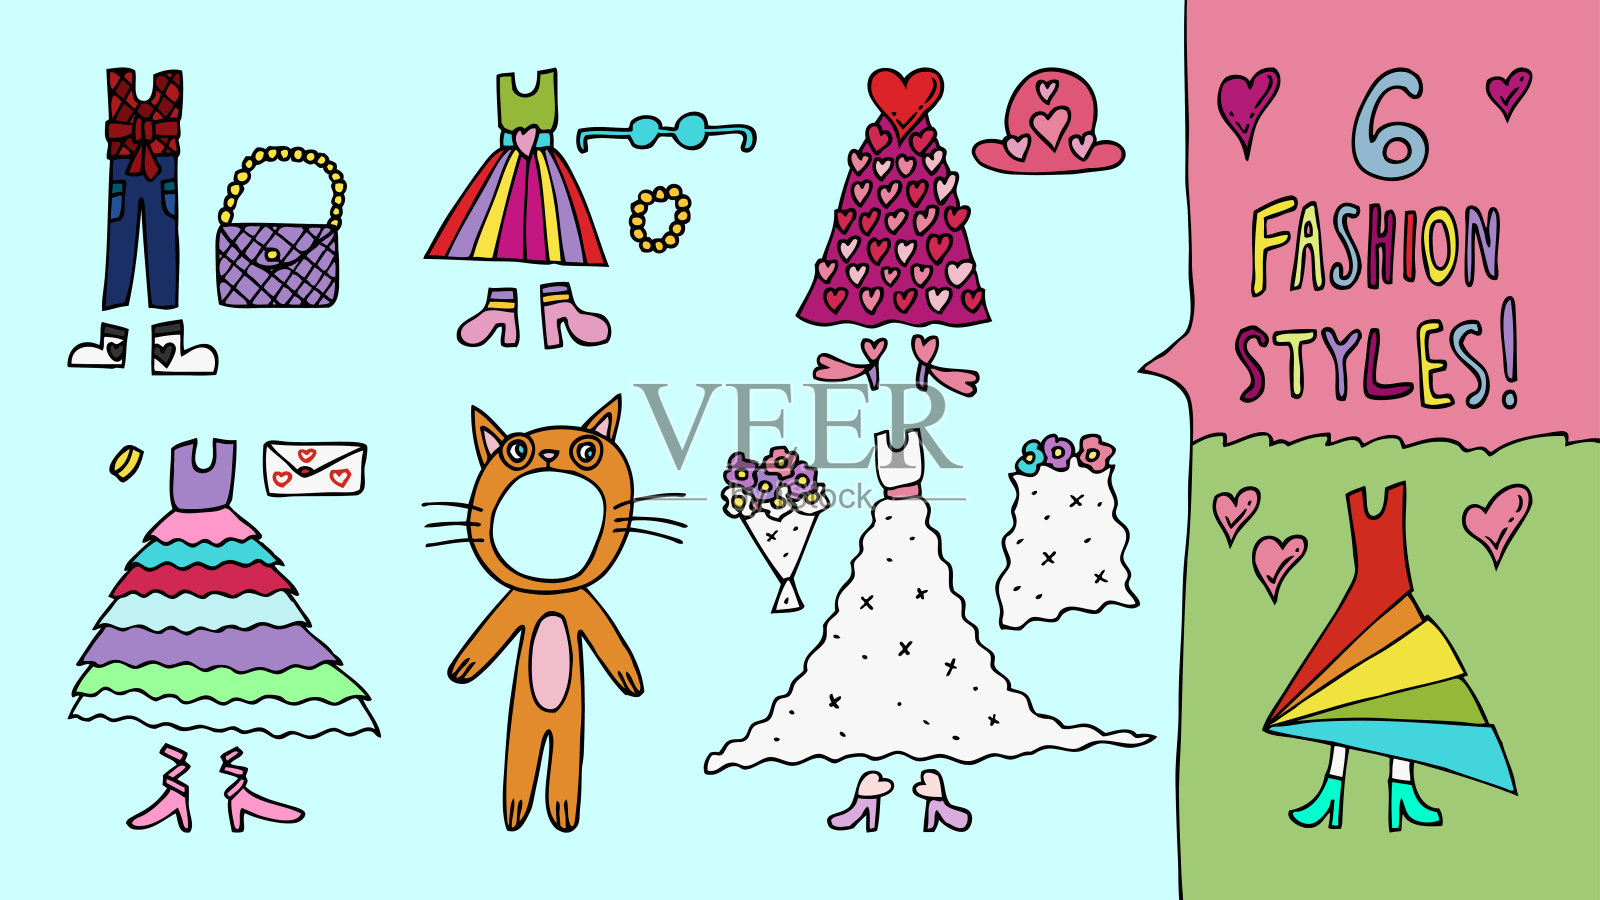 Childrens drawings fashion styles sketch with color doodles kid's hand drawn painting art cartoon fashionable clothes with dress, shoes and accessories.插画图片素材